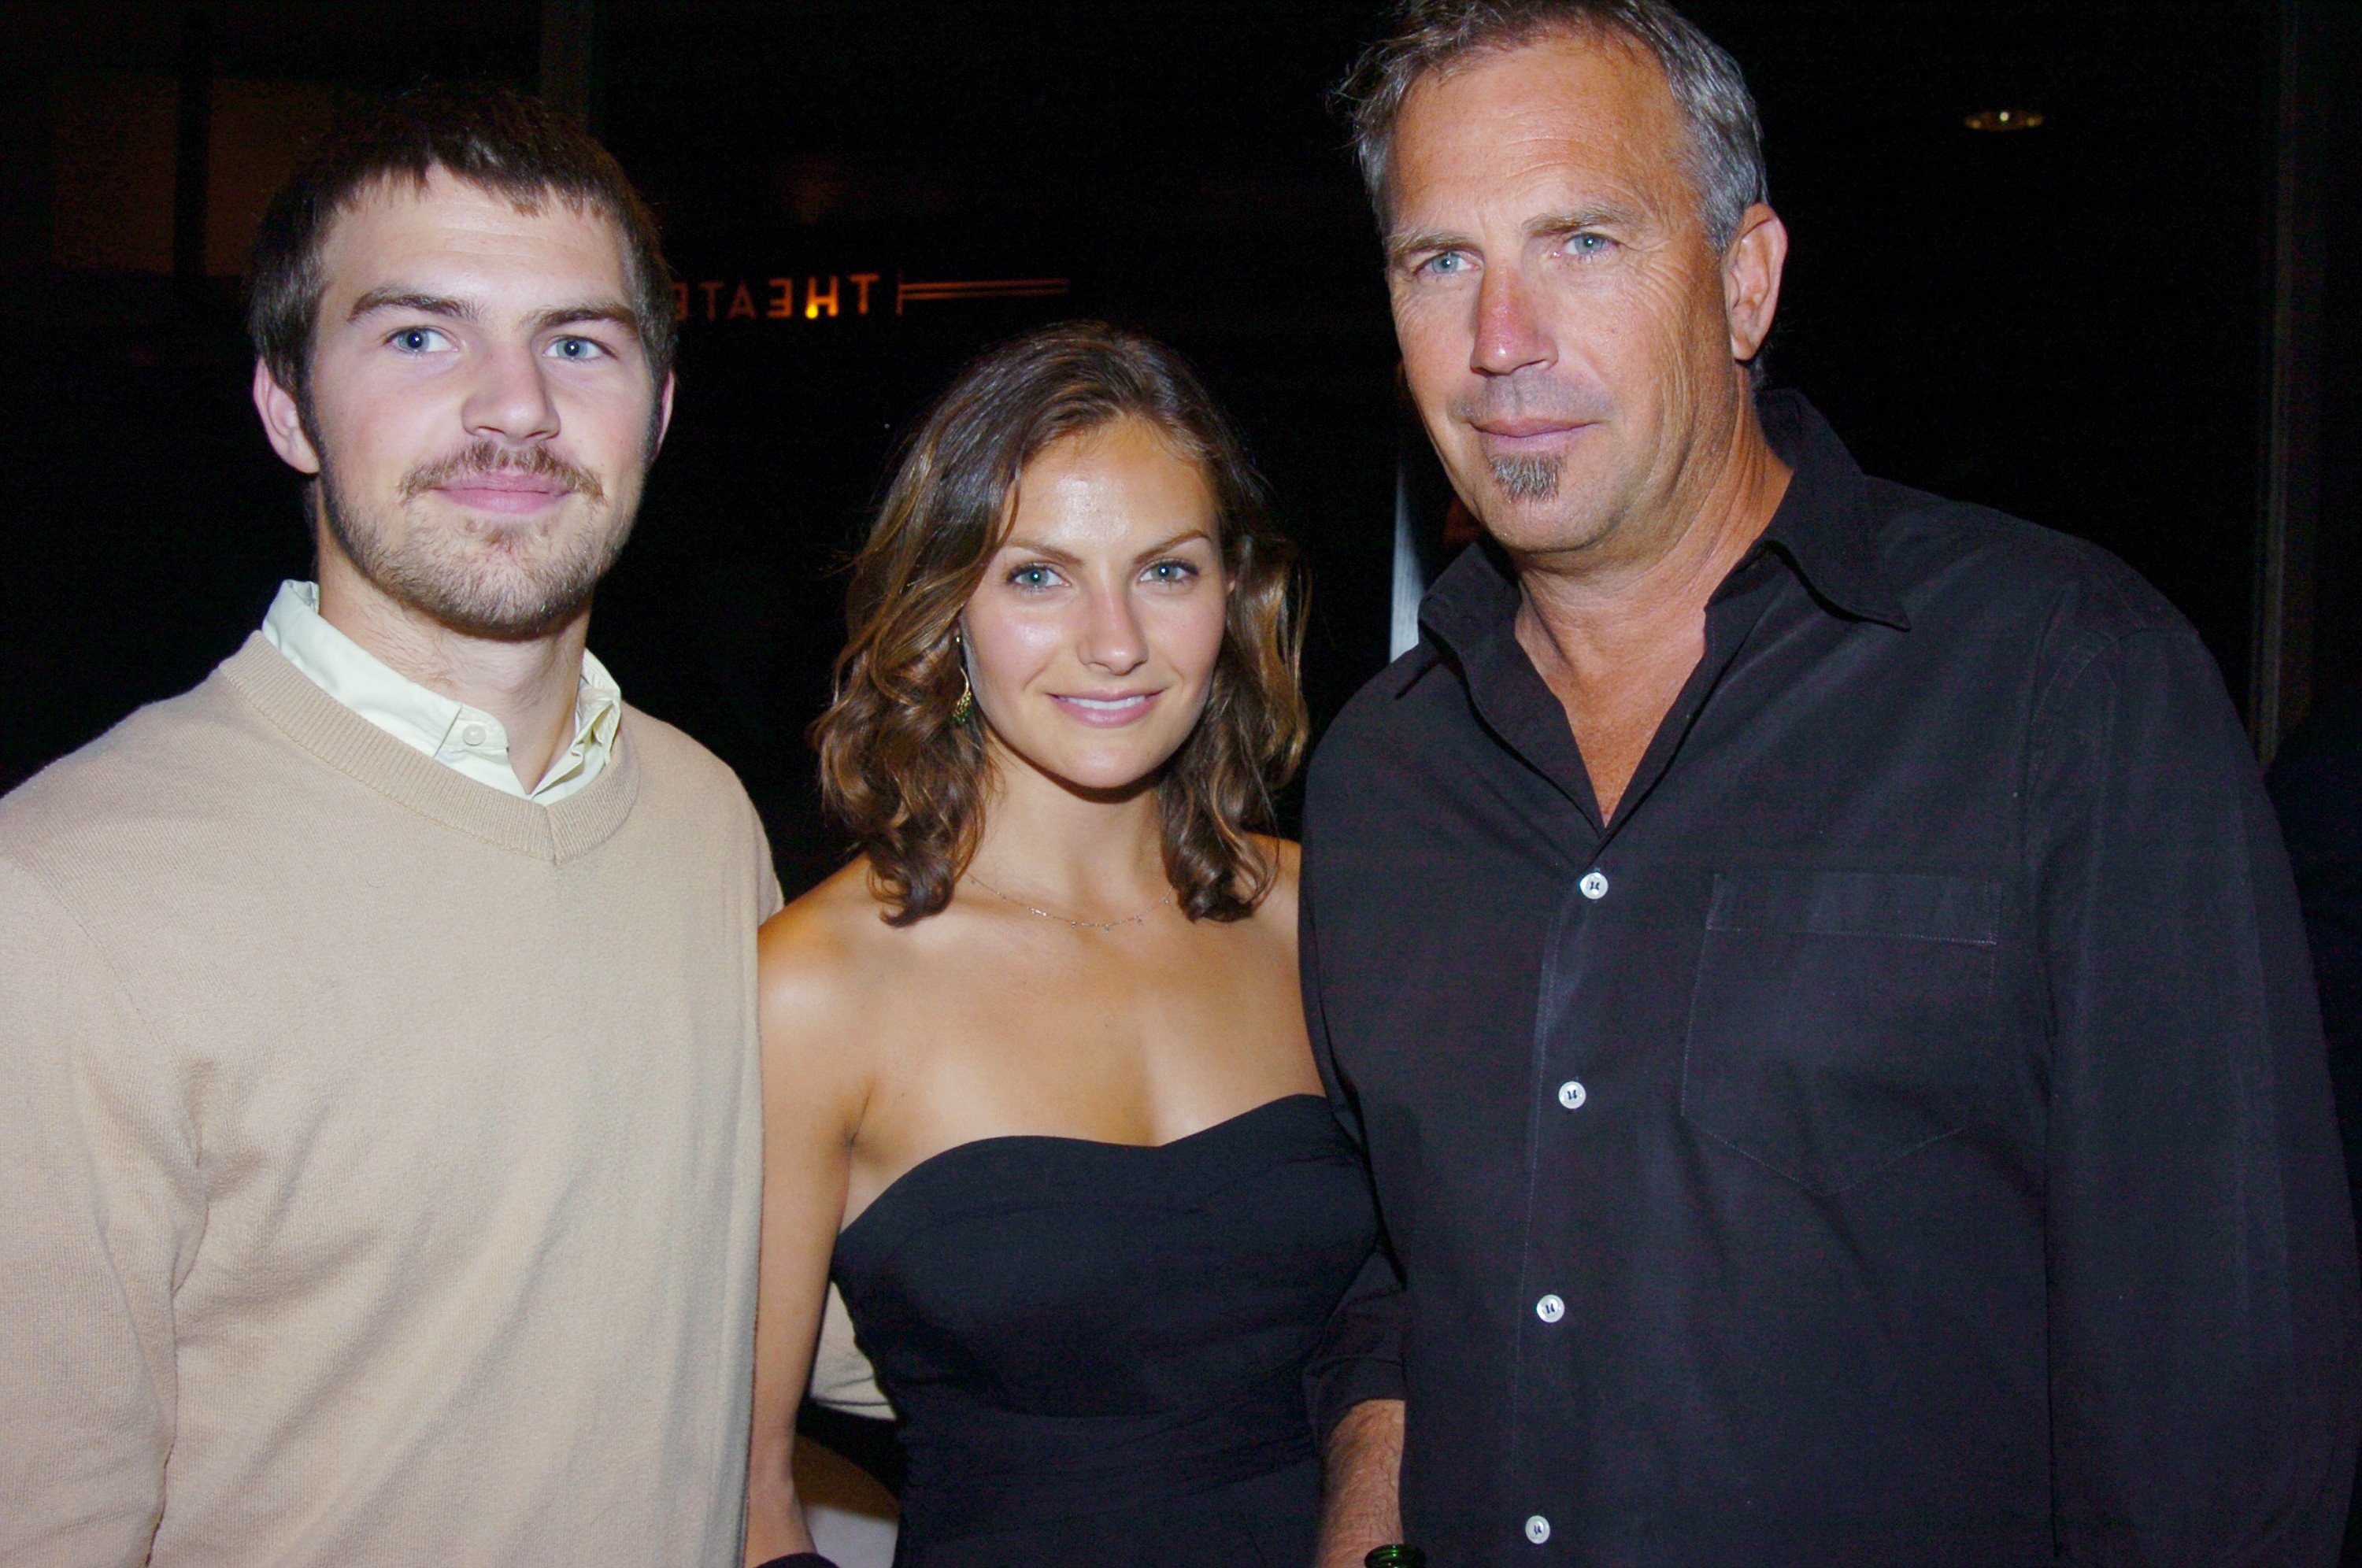 Joe, Annie, and Kevin Costner at the Tribeca Grand Hotel for a special screening of the movie "Mr. Brooks" on May 29, 2007. | Source: Getty Images